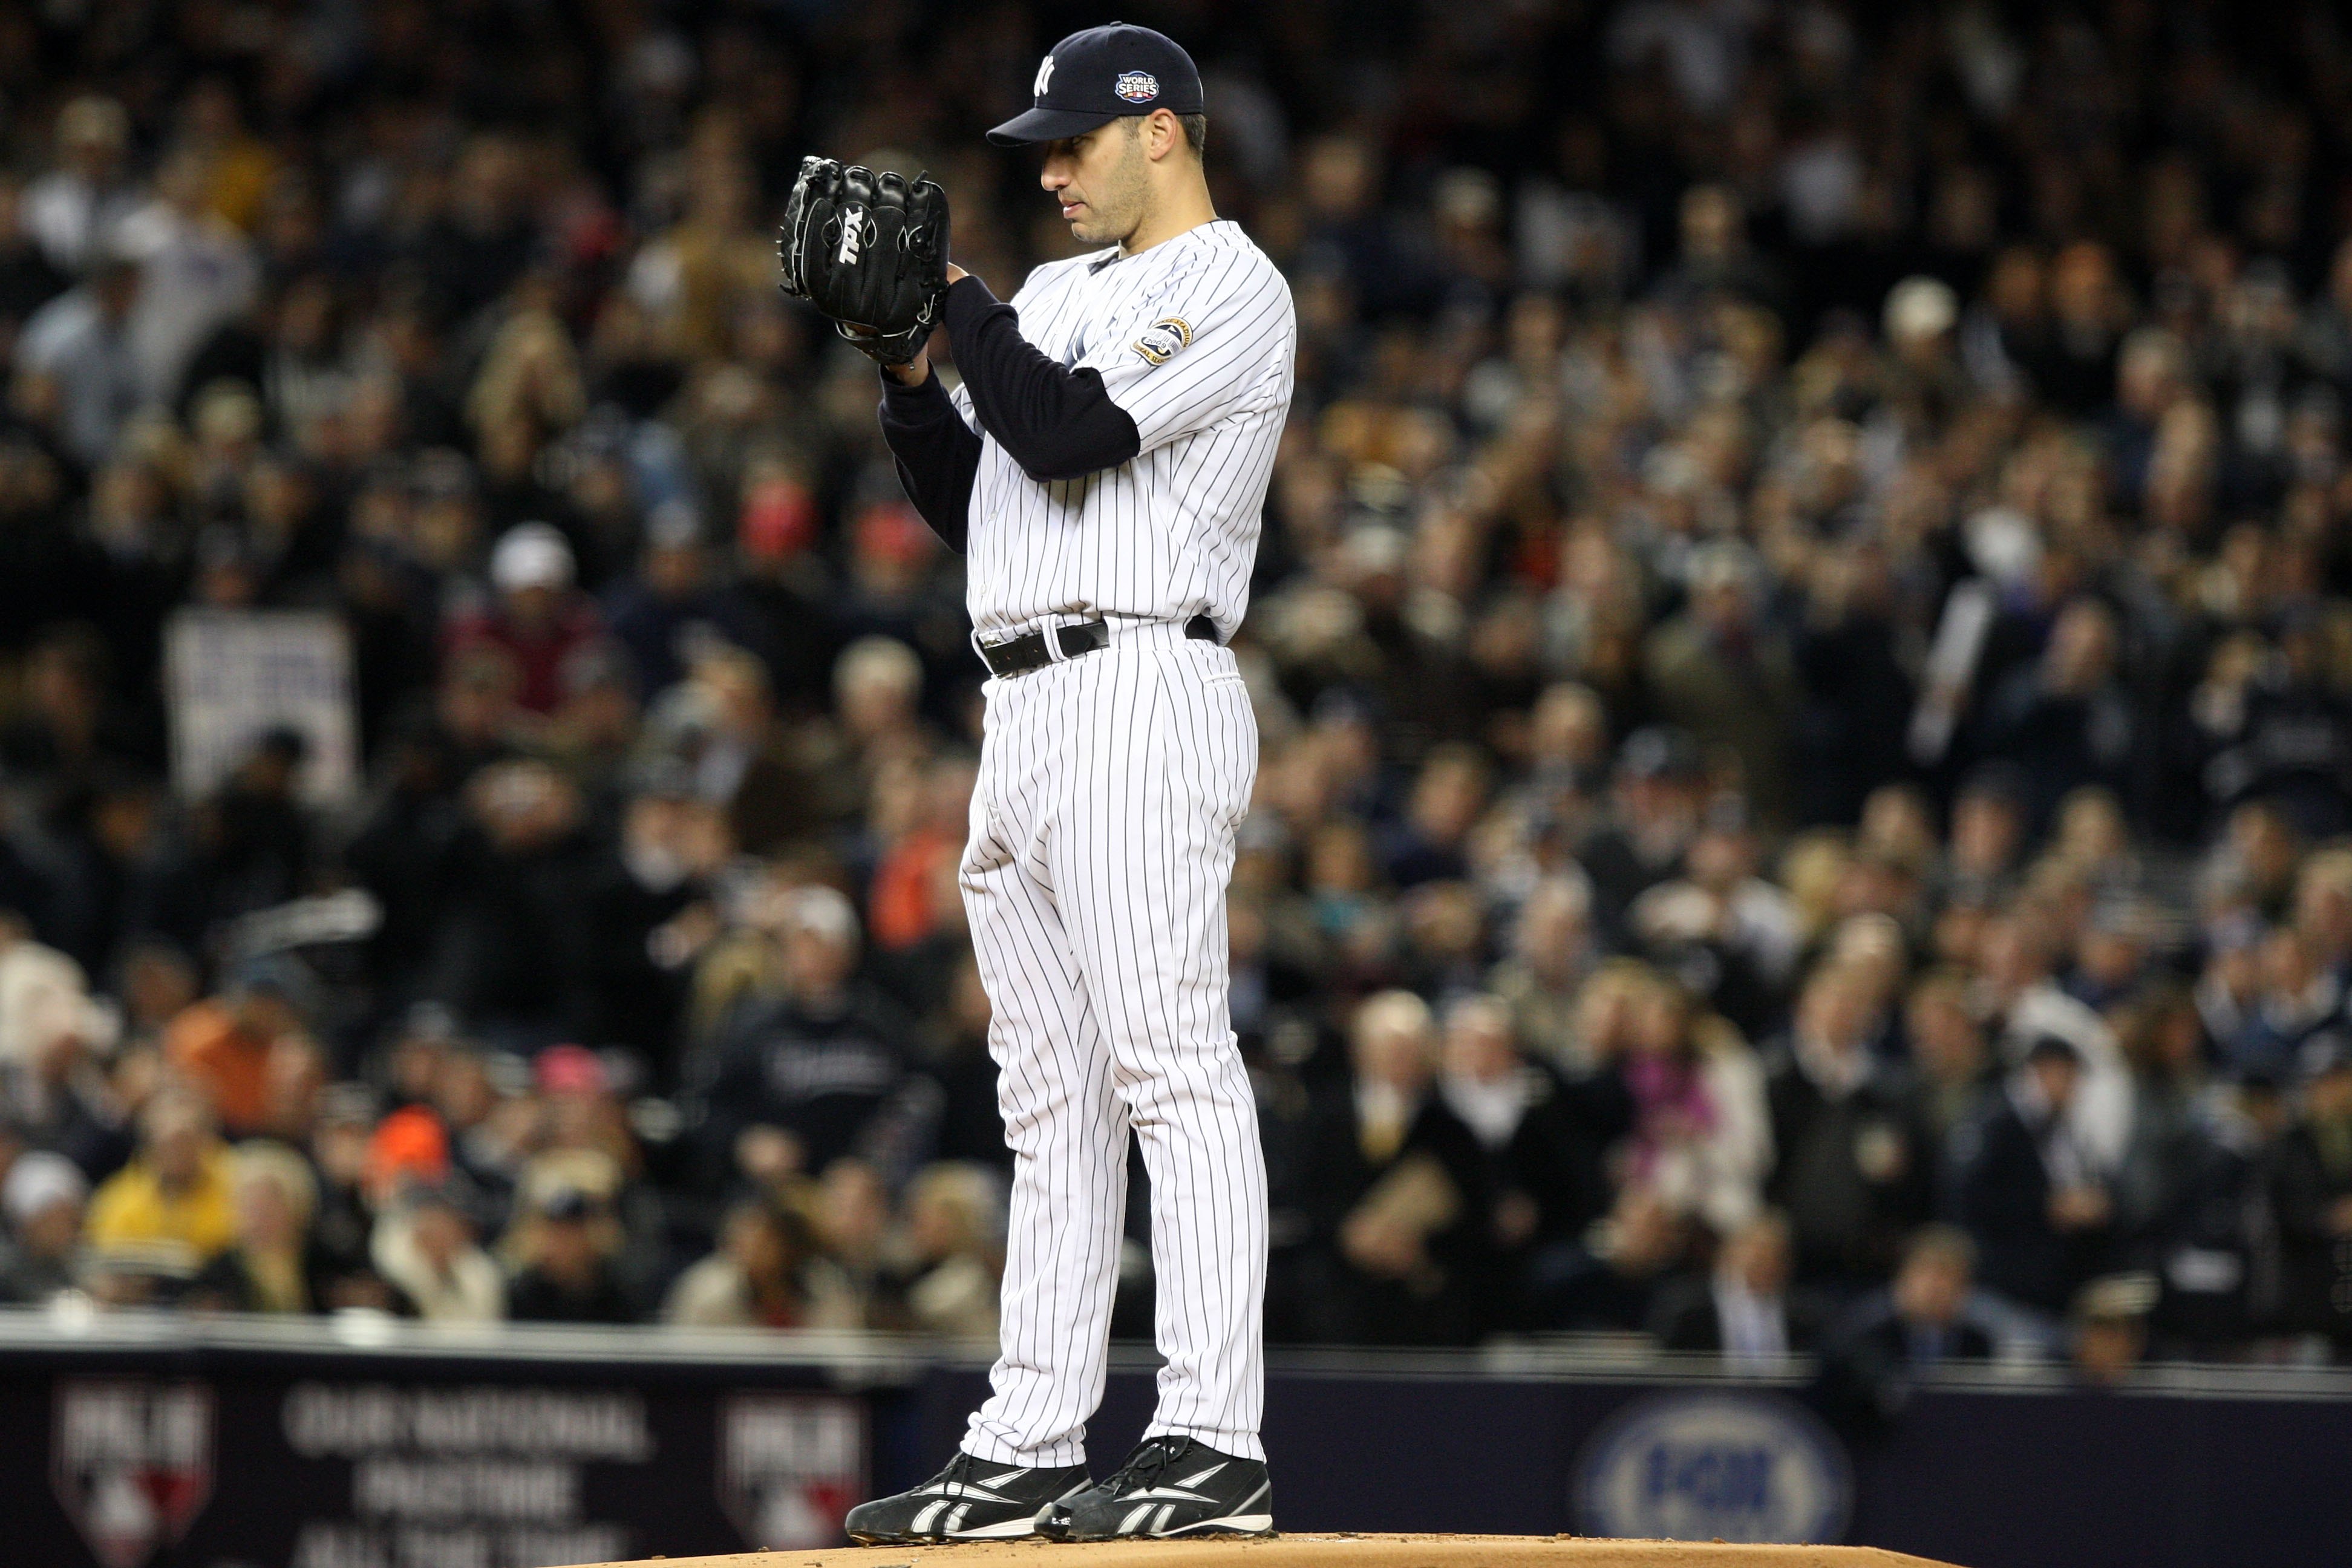 Andy Pettitte: Yankees Dynasty Core Four player, 3x All-Star, Most  Postseason Wins all-time, 7 seasons in the top 10 AL FIP - Italian  Americans in Baseball